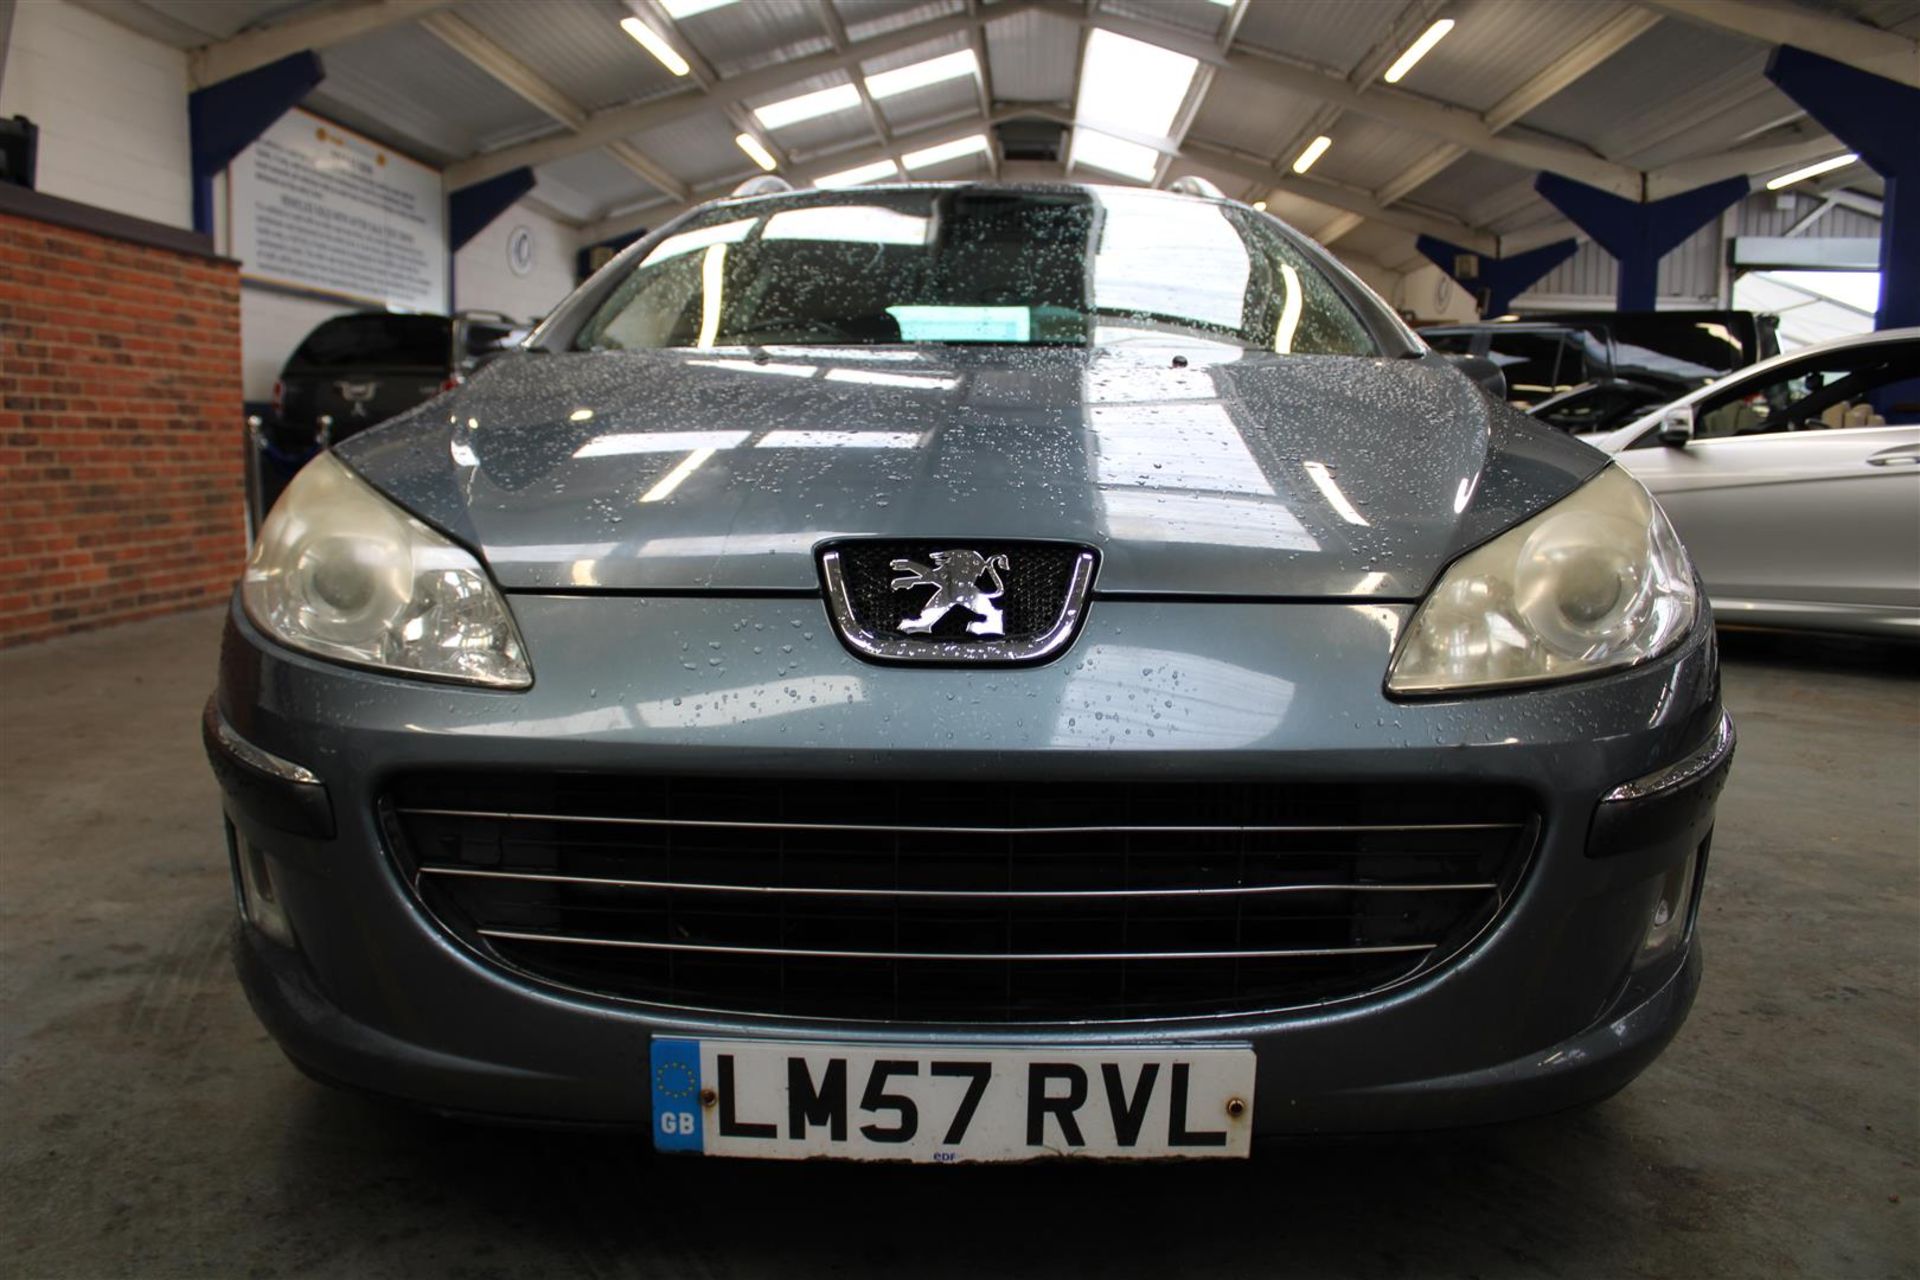 57 08 Peugeot 407 SW SE HDI - Image 2 of 32